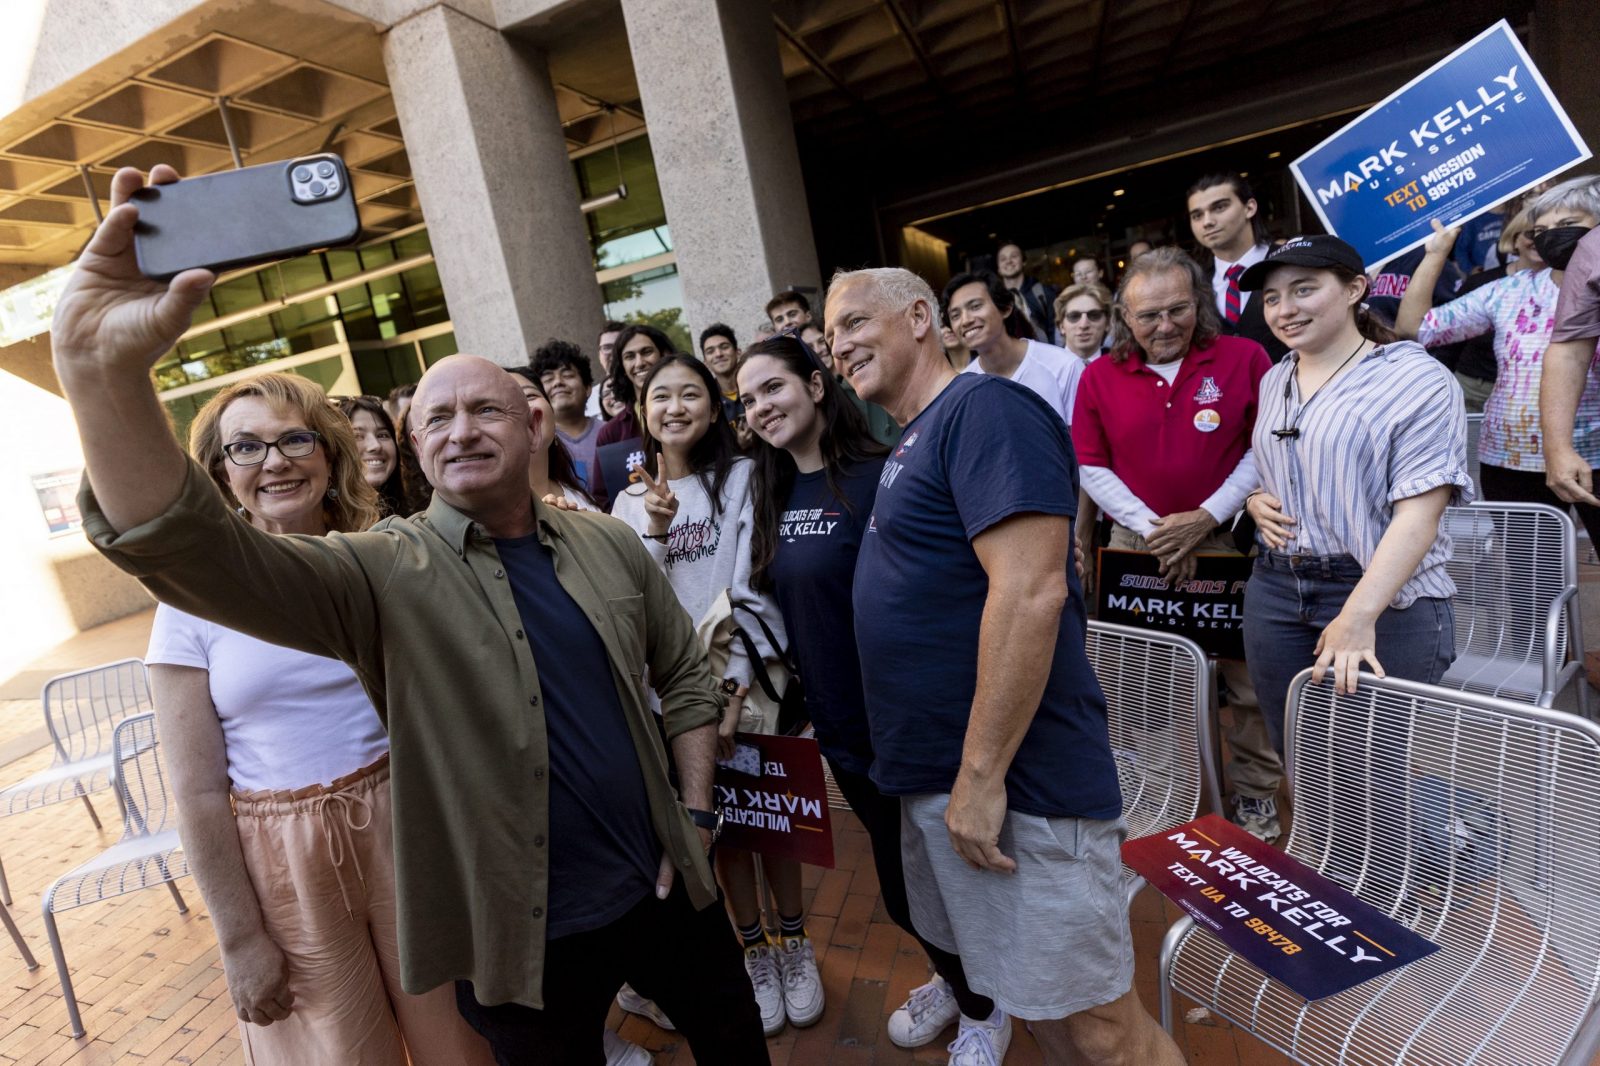 epa10291662 US Democratic Senator for Arizona and Senate candidate Mark Kelly (L) poses with supporters at the University of Arizona, in Tucson, Arizona, USA, 06 November 2022. The US midterm elections are held every four years at the midpoint of each presidential term and this year include elections for all 435 seats in the House of Representatives, 35 of the 100 seats in the Senate and 36 of the 50 state governors as well as numerous other local seats and ballot issues.  EPA/ETIENNE LAURENT